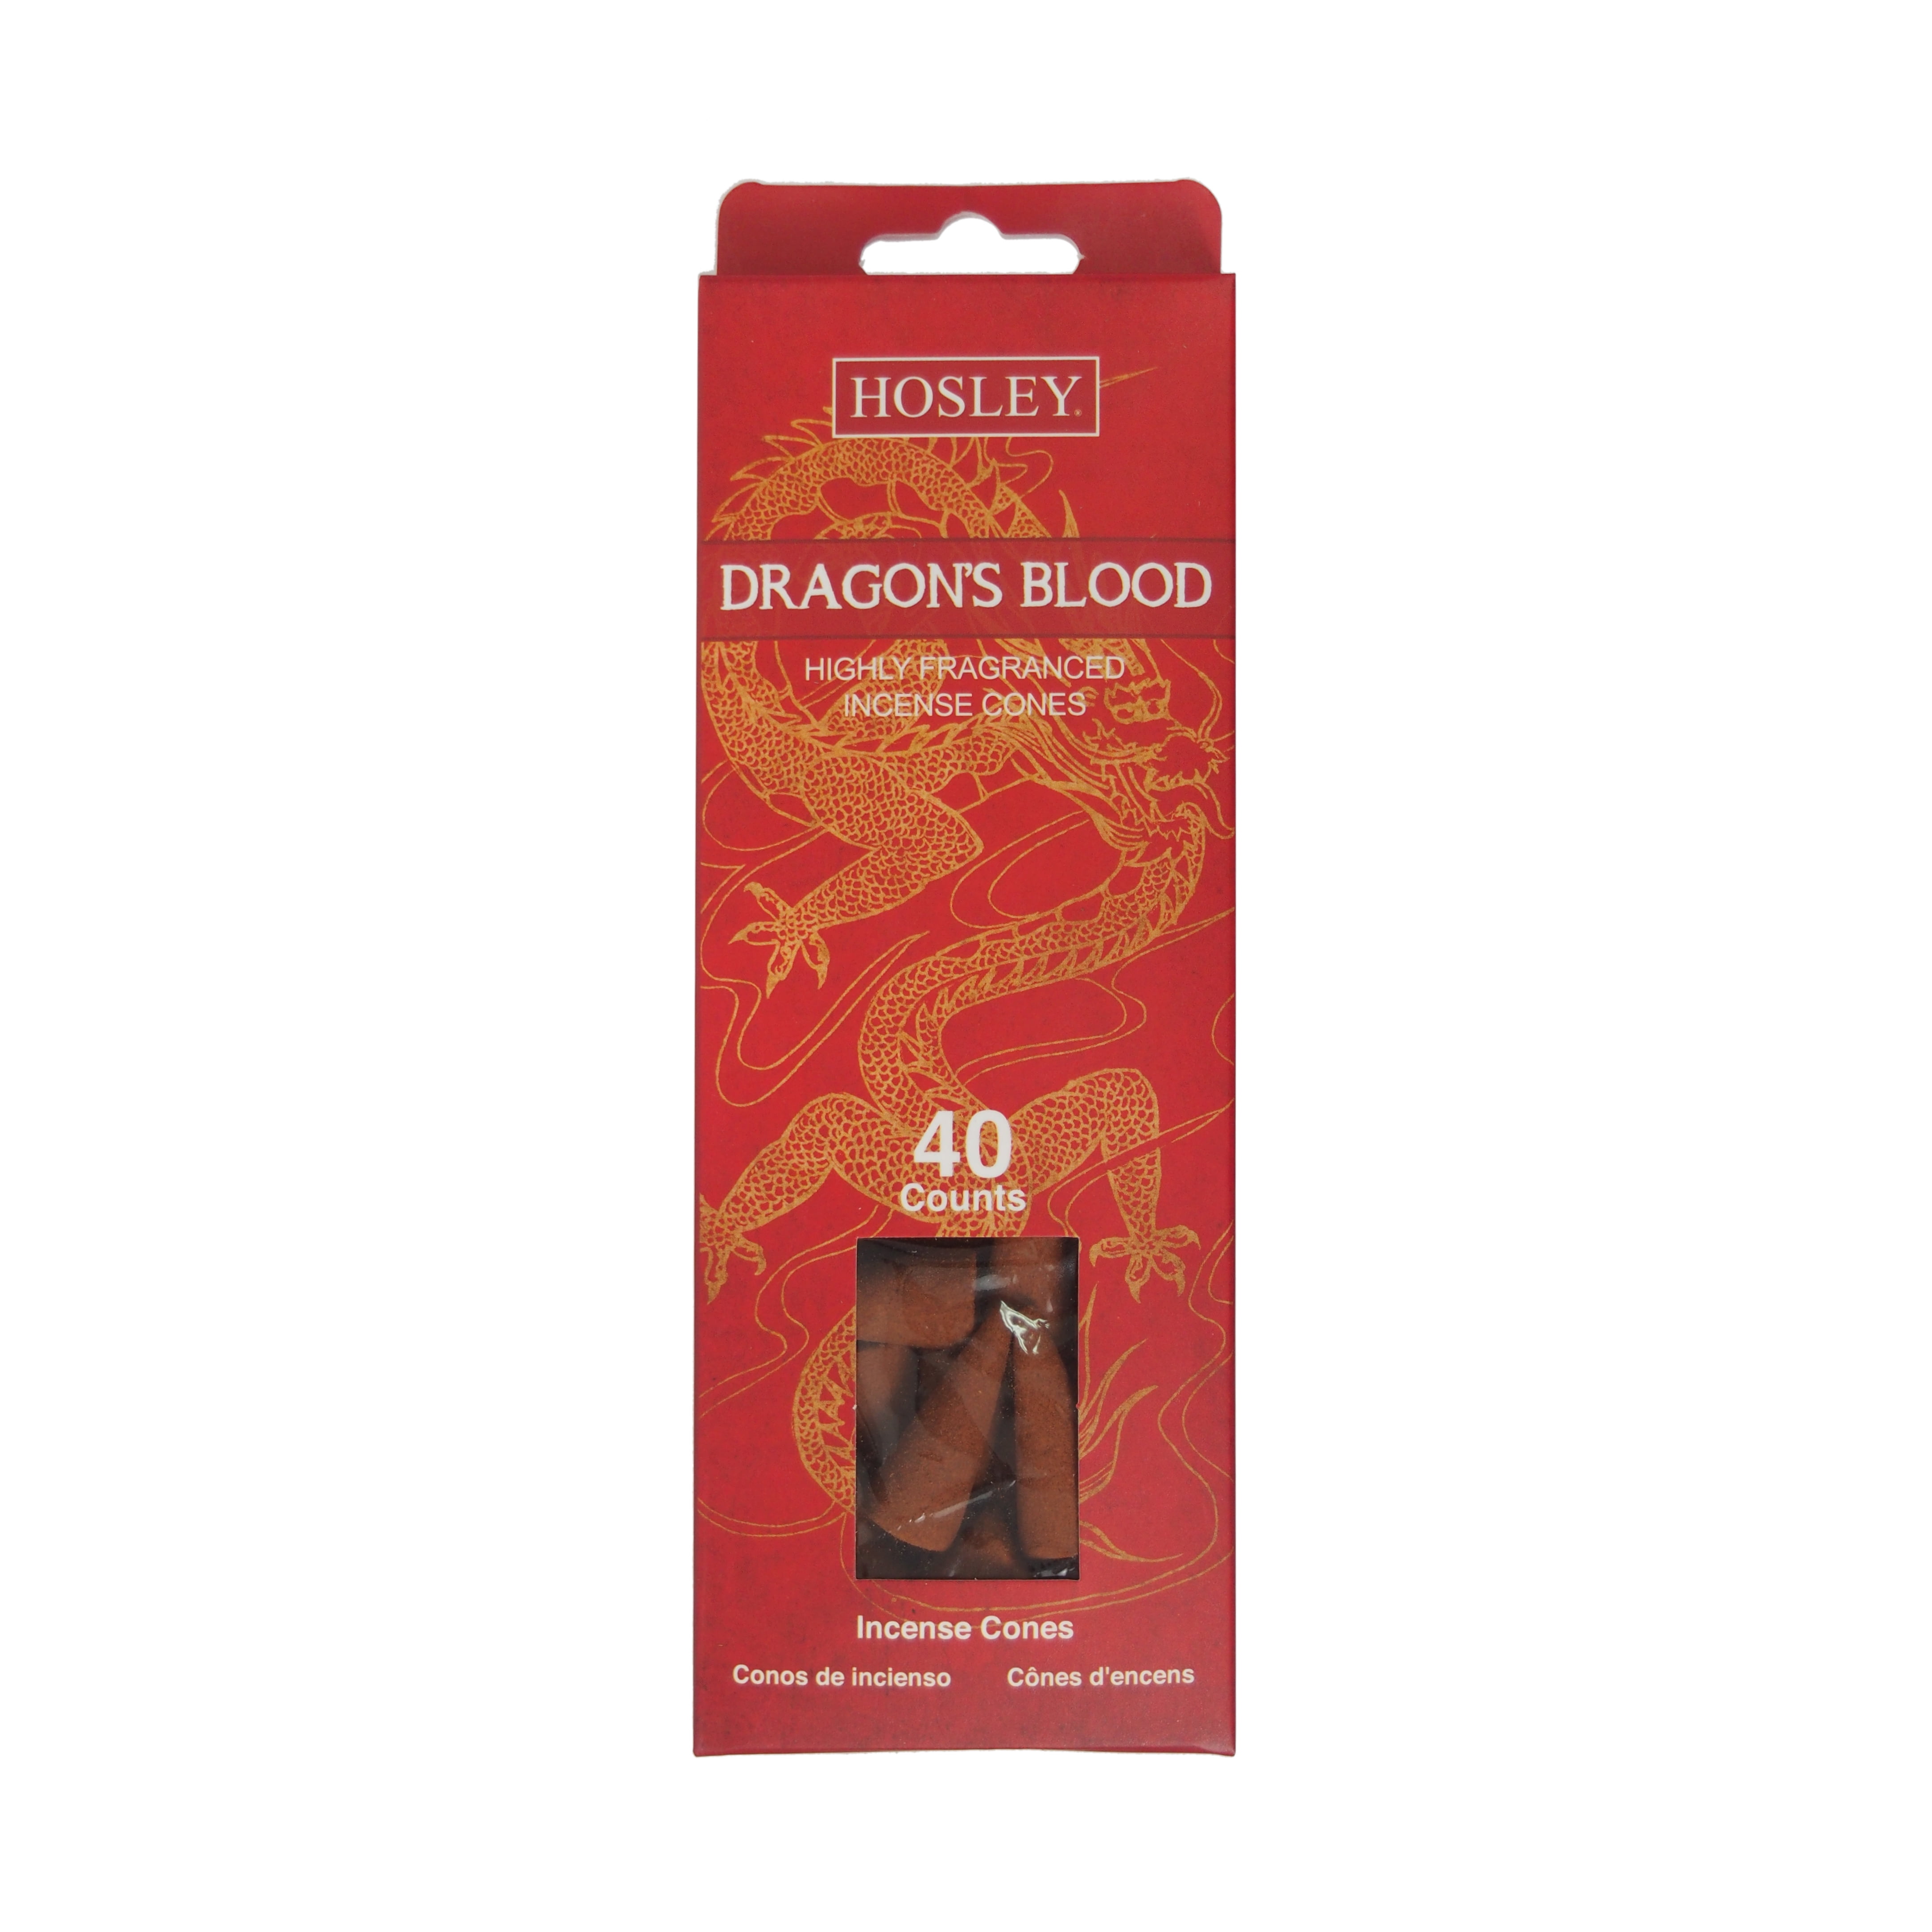 Hosley 40 pc. Highly Fragrance Dragon's Blood Incense Cones